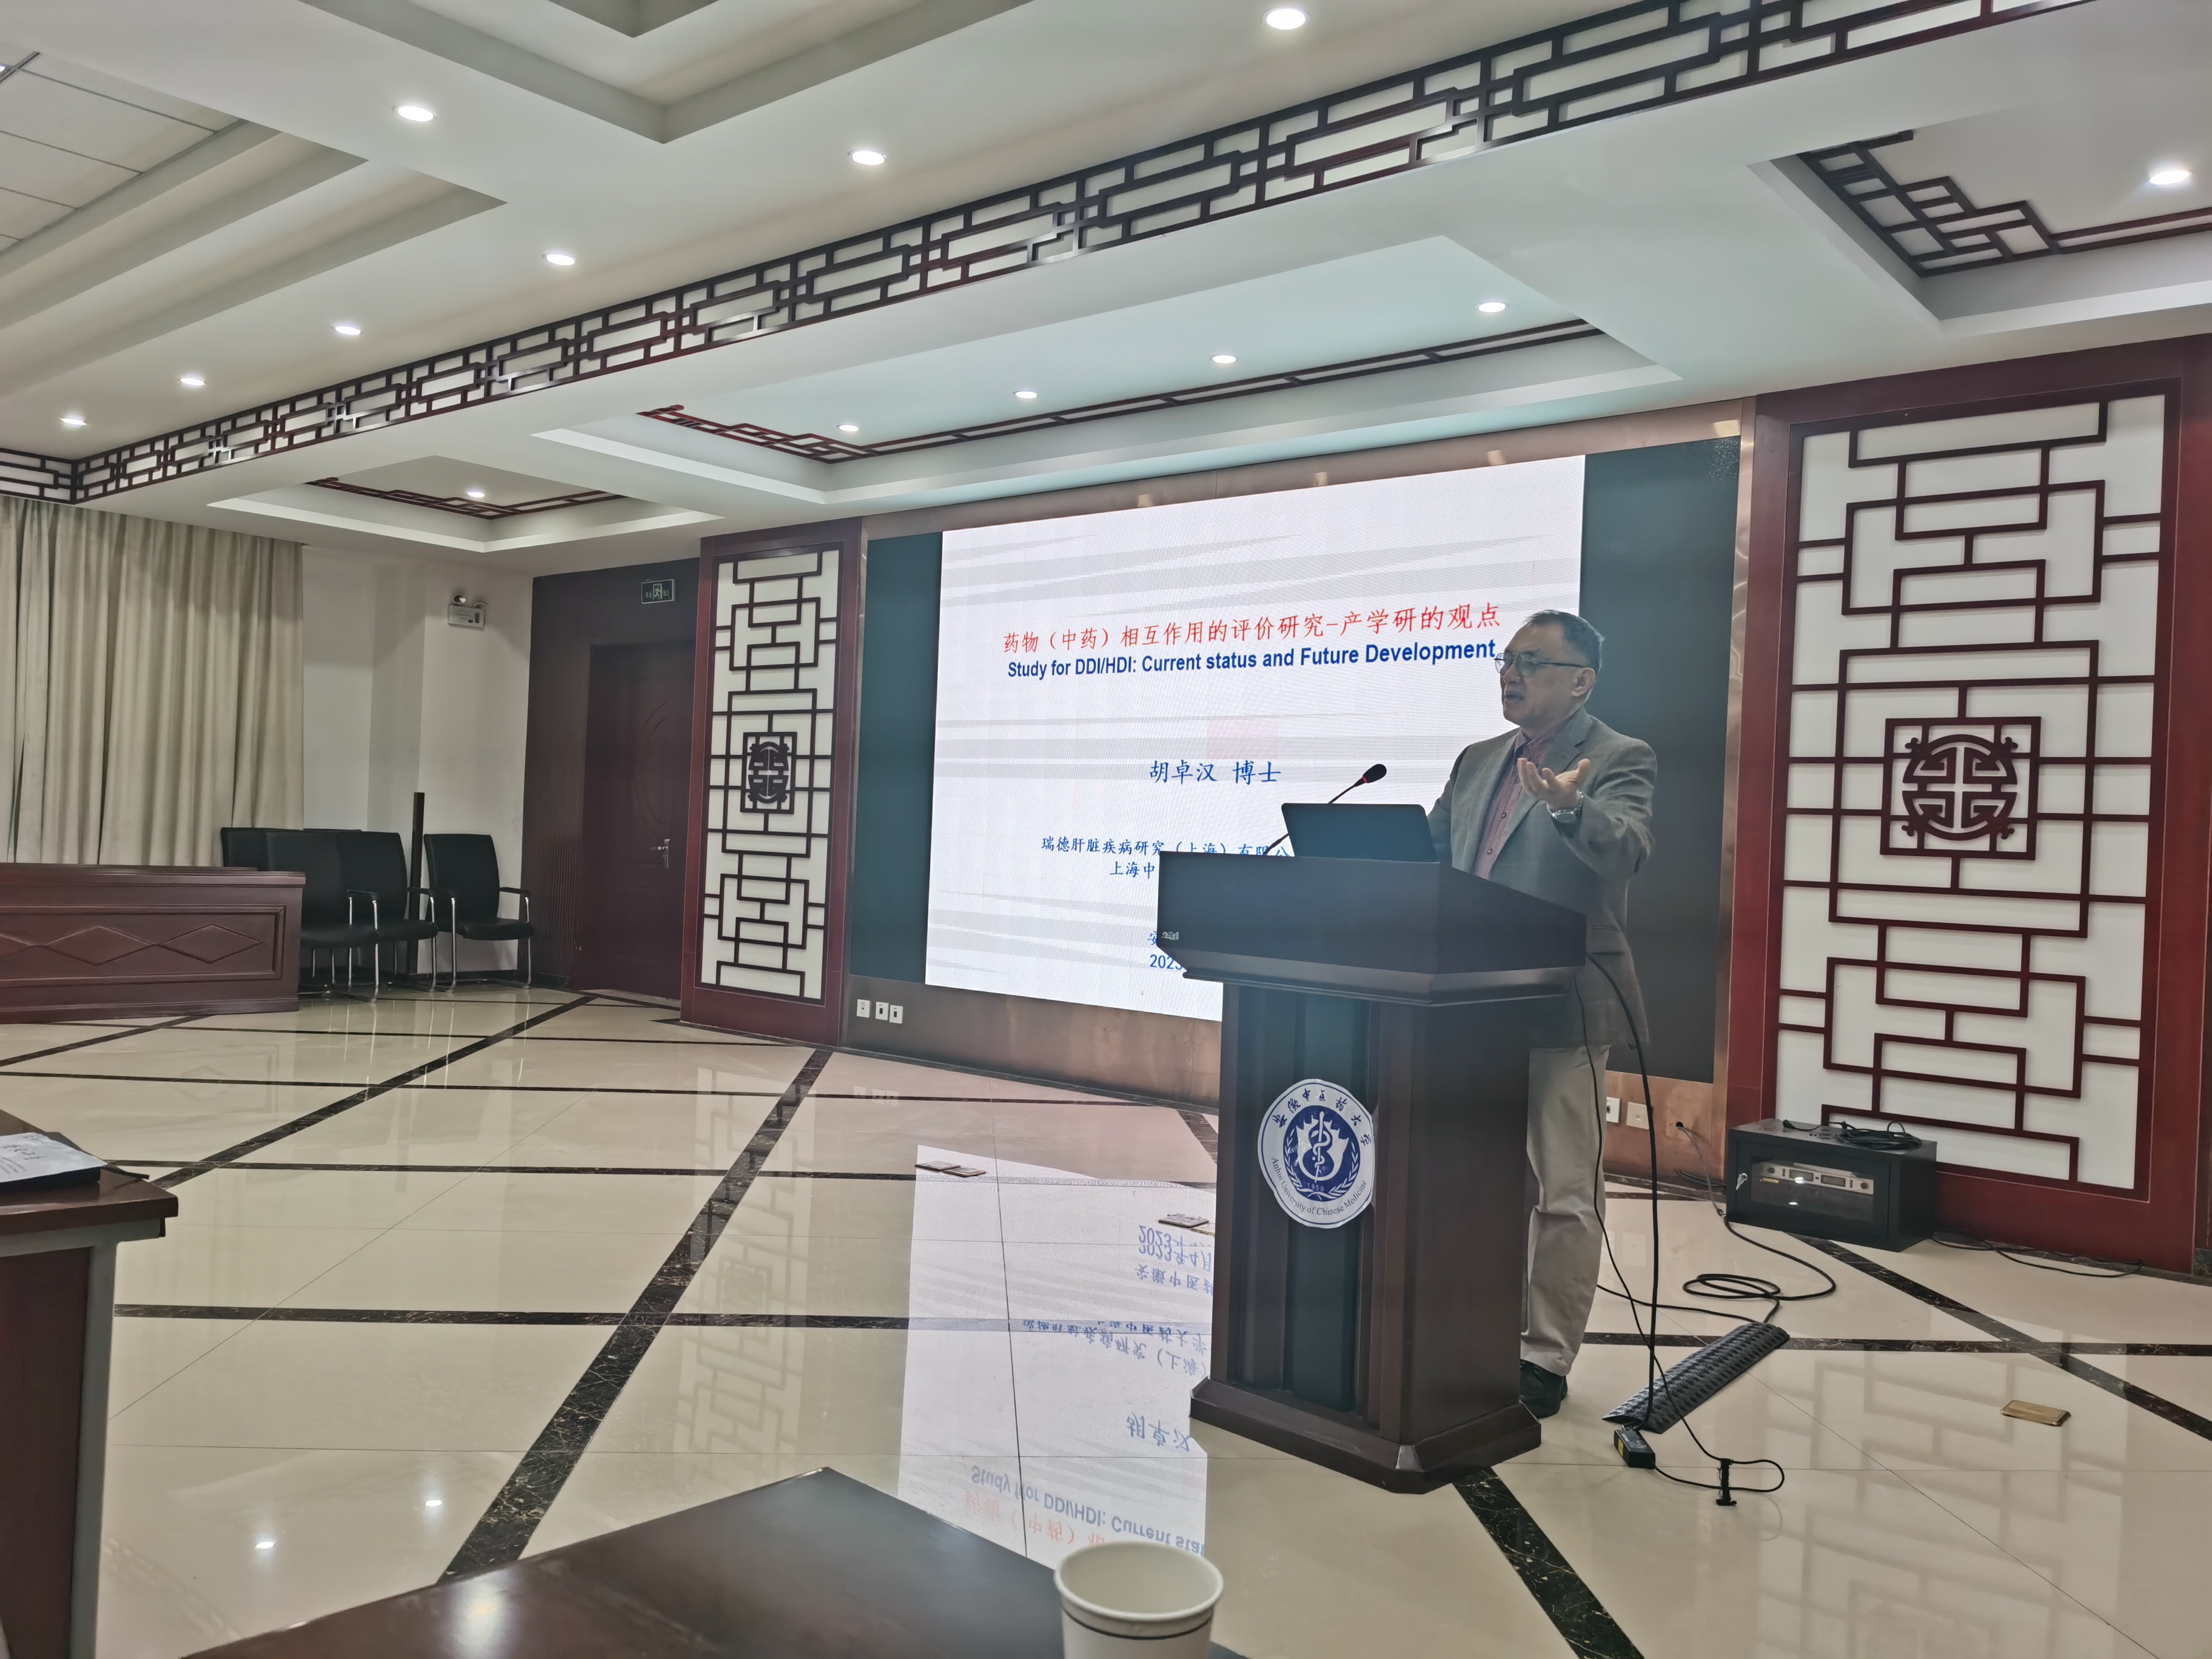 Prof. Hu Zhuohan, Chairman of Rild, Participated in Xin'an Forum of Anhui University of Traditional Chinese Medicine